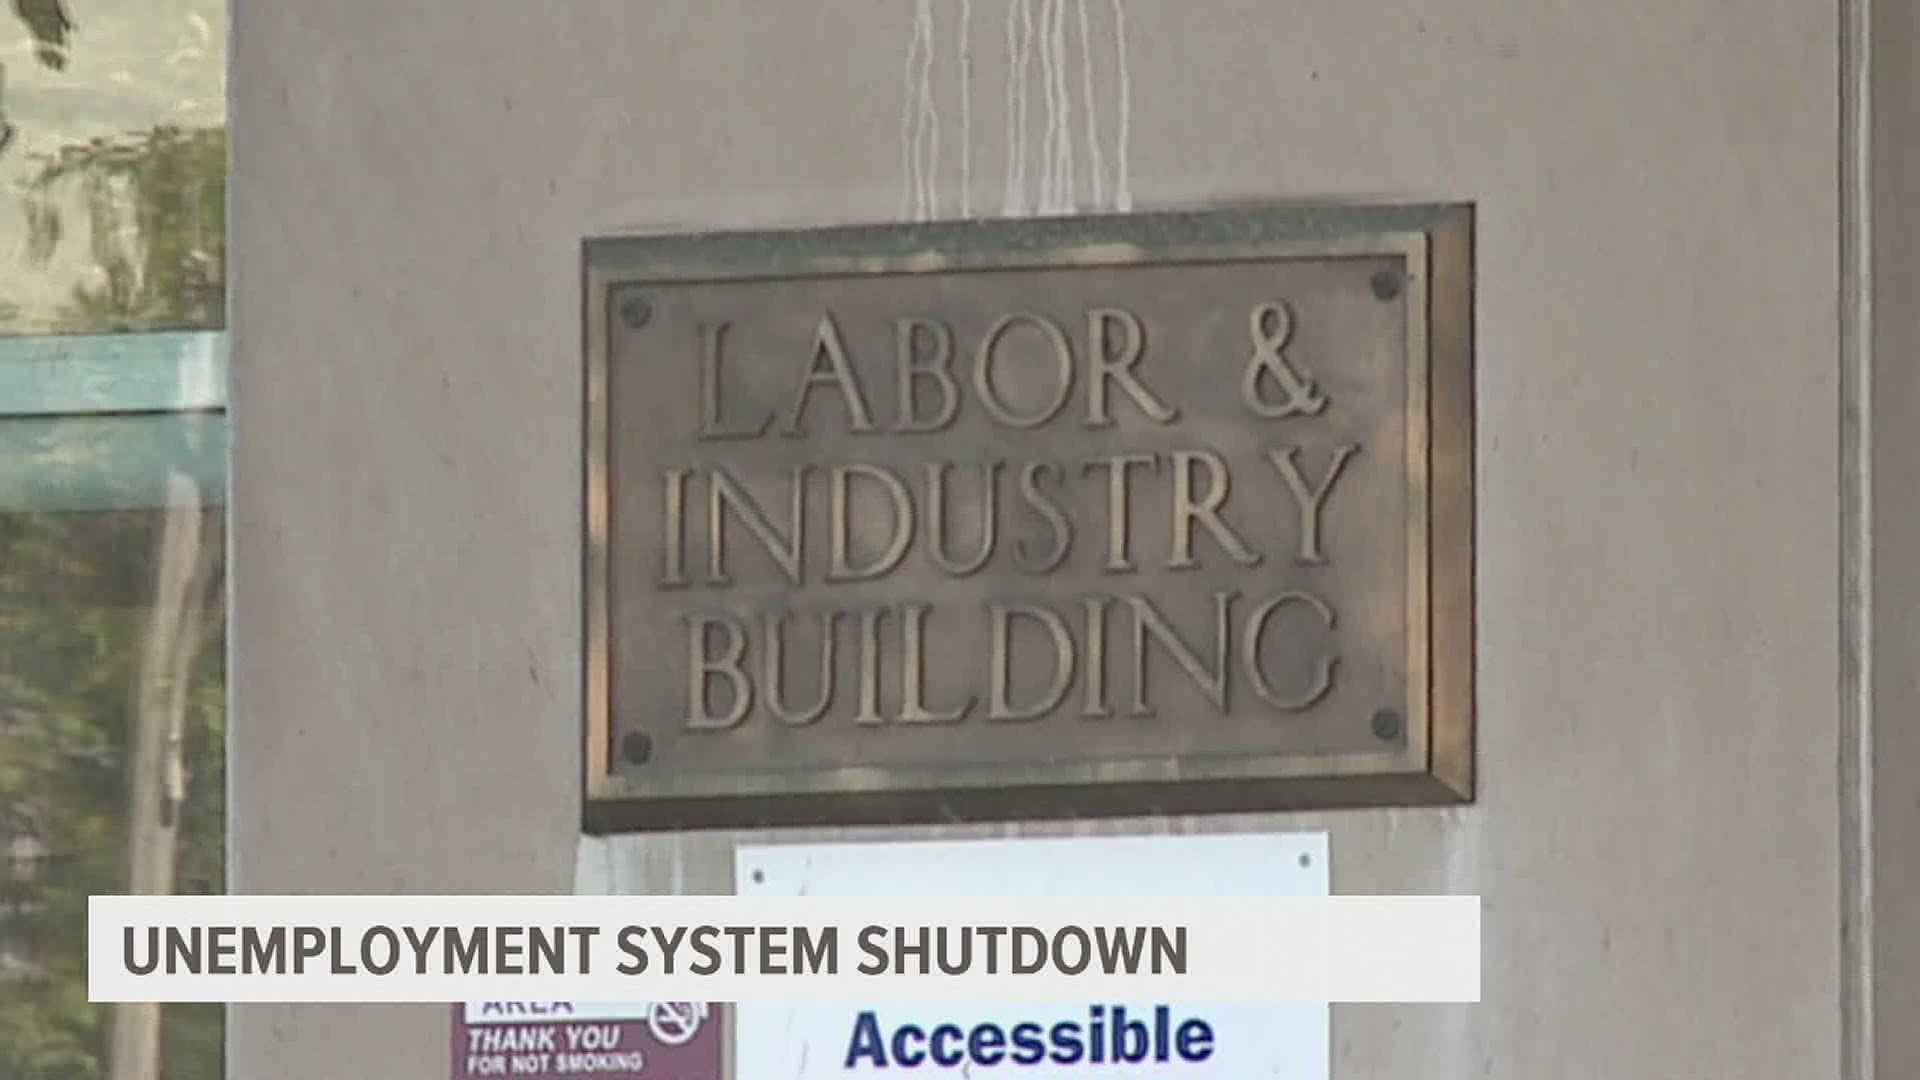 To launch the new unemployment compensation system Pennsylvania's Department of Labor and Industry must shut down the old system for several days.